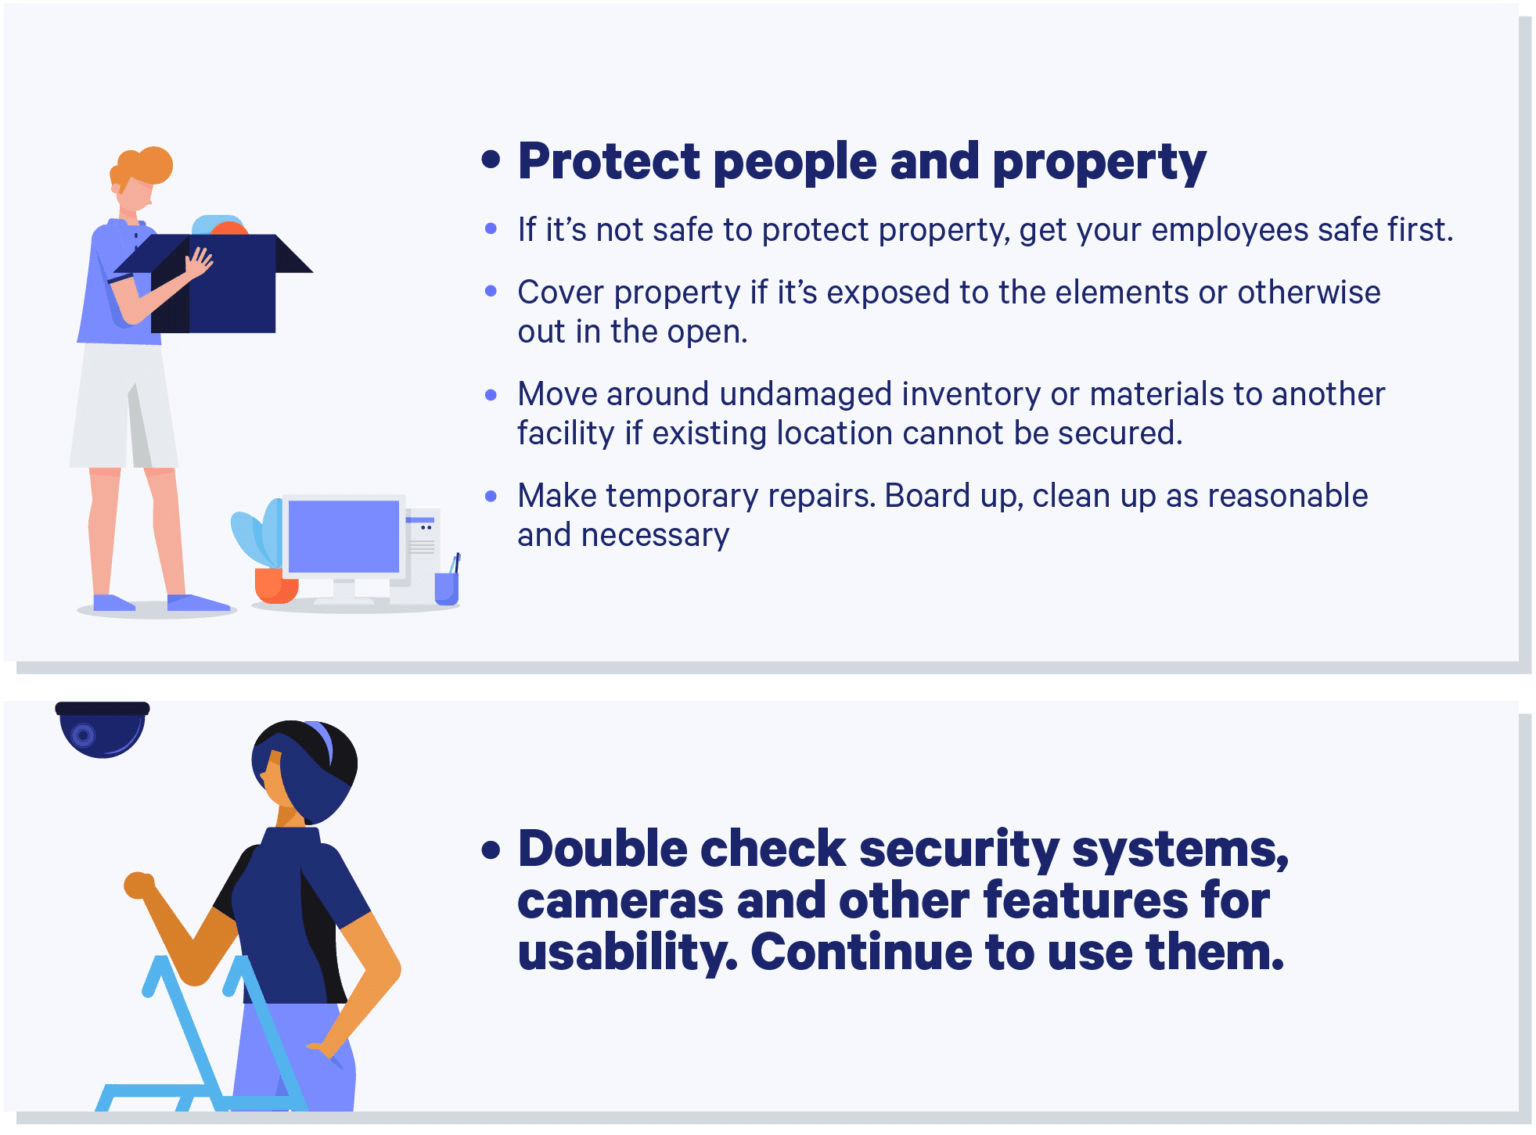 Infographic displaying security steps if property damage occurs